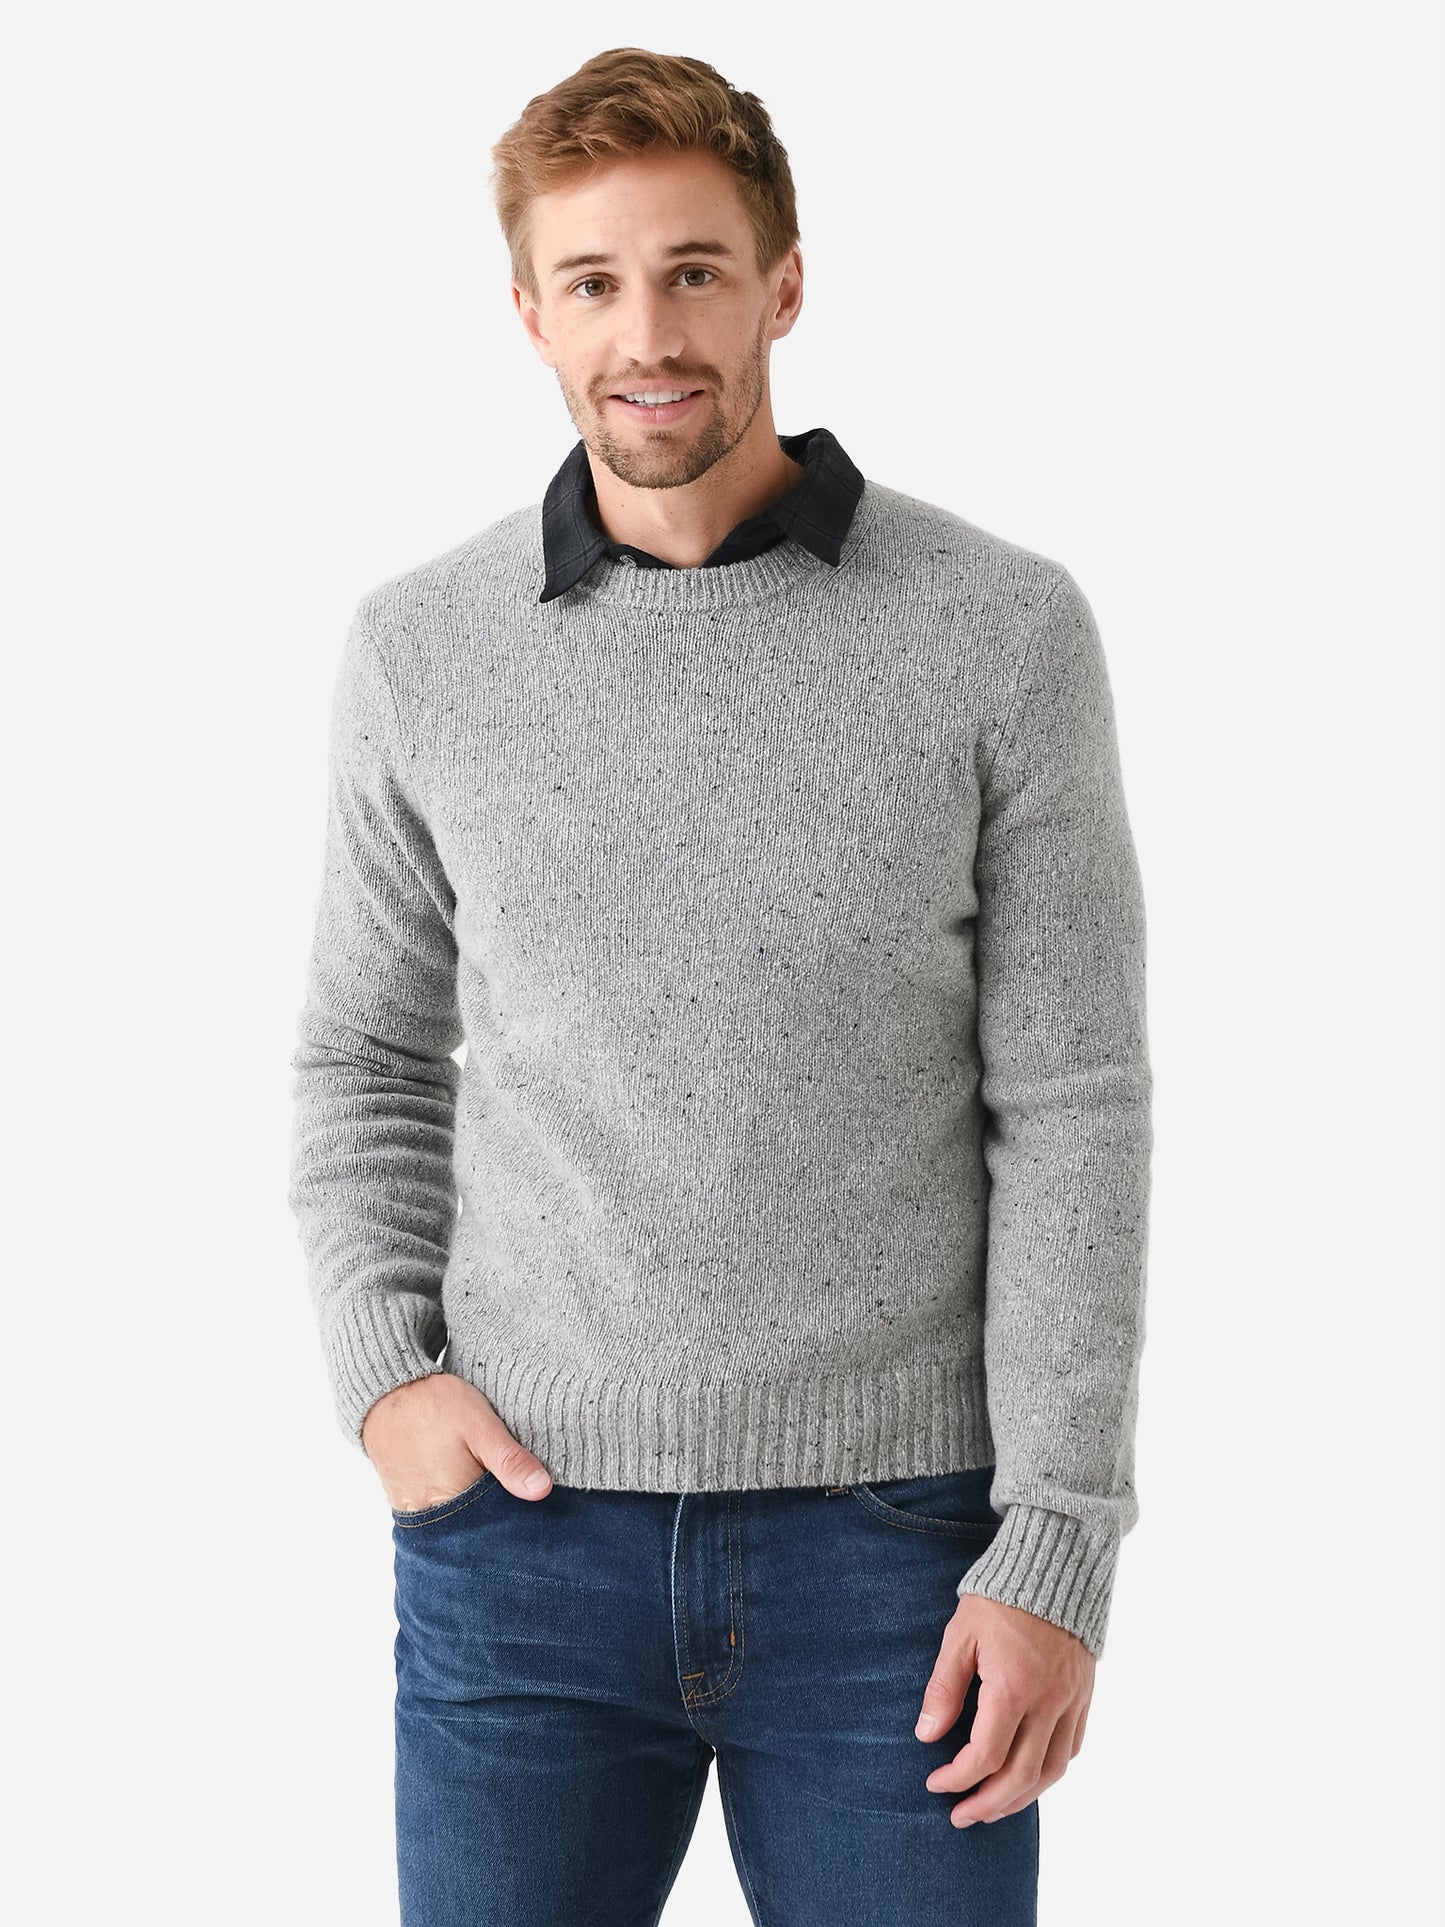 Outerknown Men's Tomales Donegal Crew Sweater